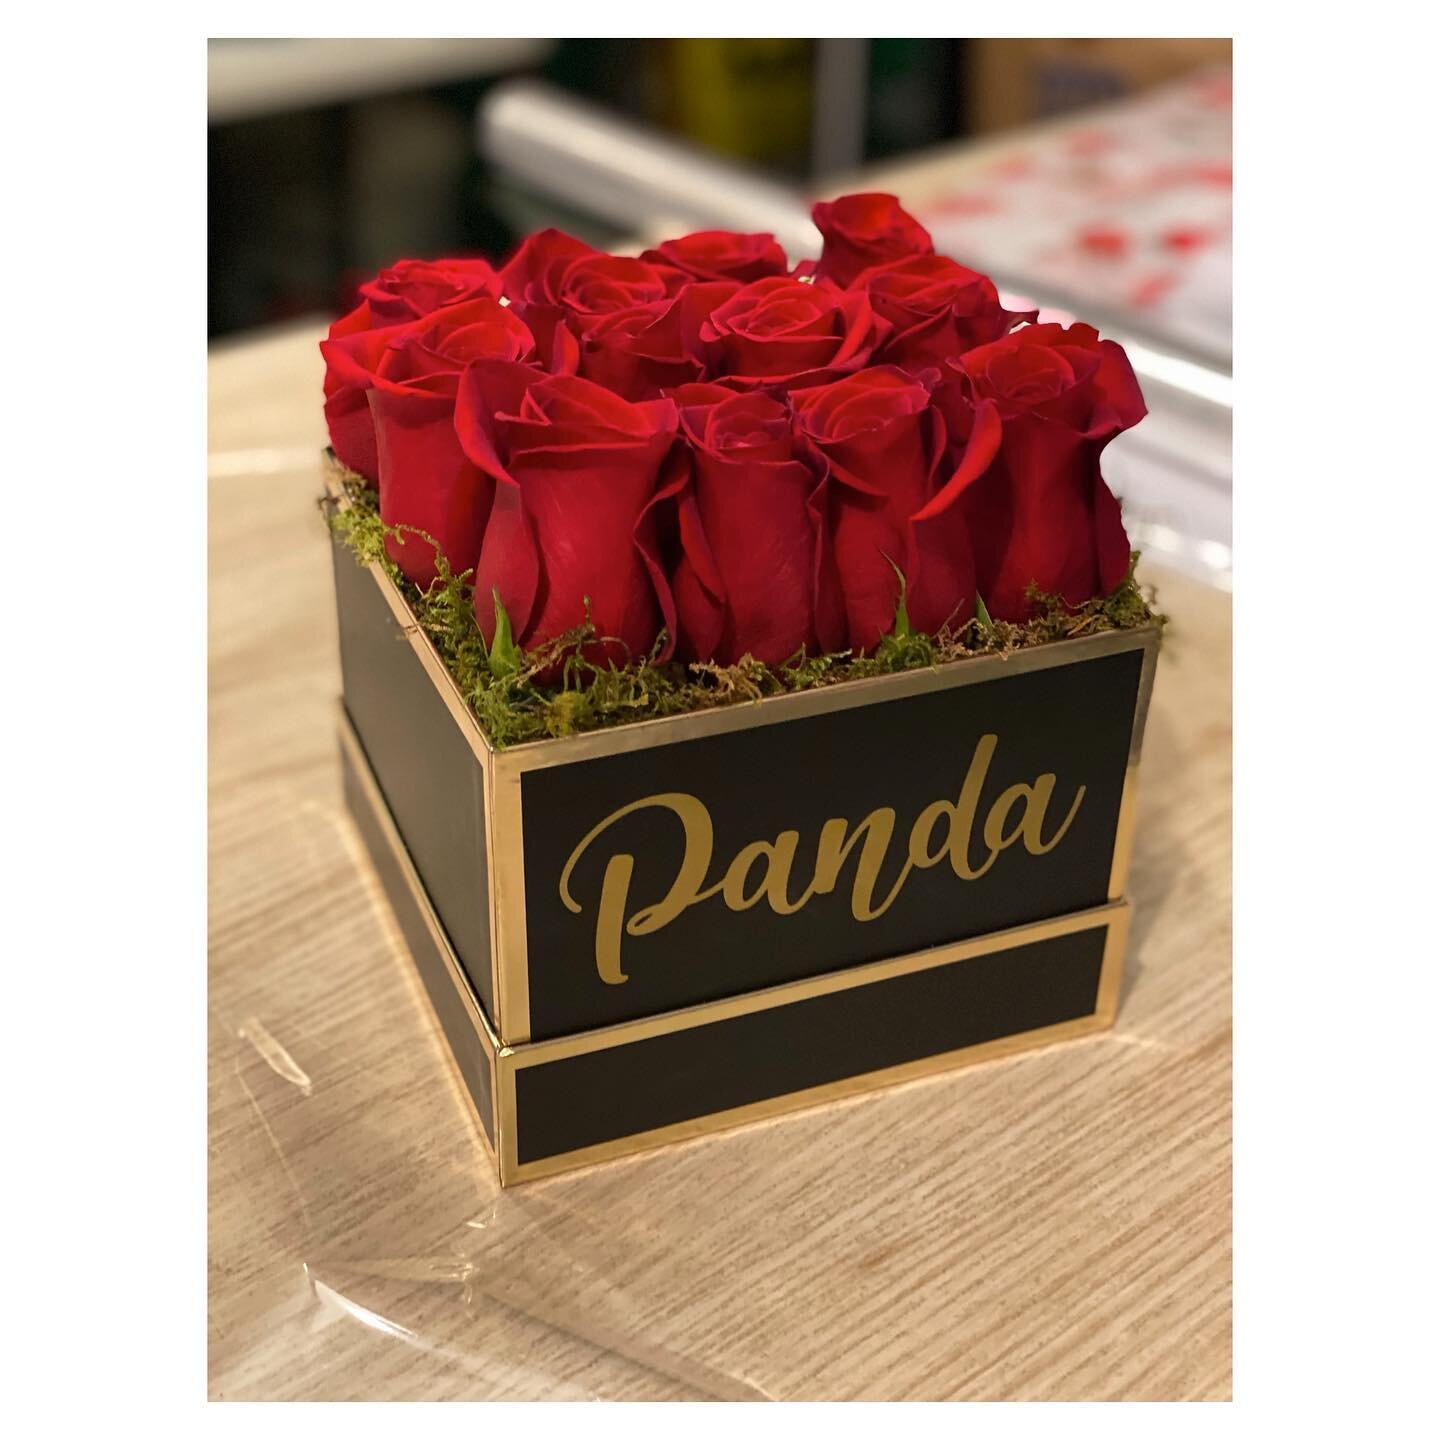 Featuring our Dozen Rose Monogram Boxes &hearts;️ These were a huge hit this Valentine&rsquo;s Day! Our new collection is launching soon...stay tuned! 💕
.
S h o p 🌹 O n l i n e . at www.pinkpetals.ca
.
For all of your wedding or event floral needs,